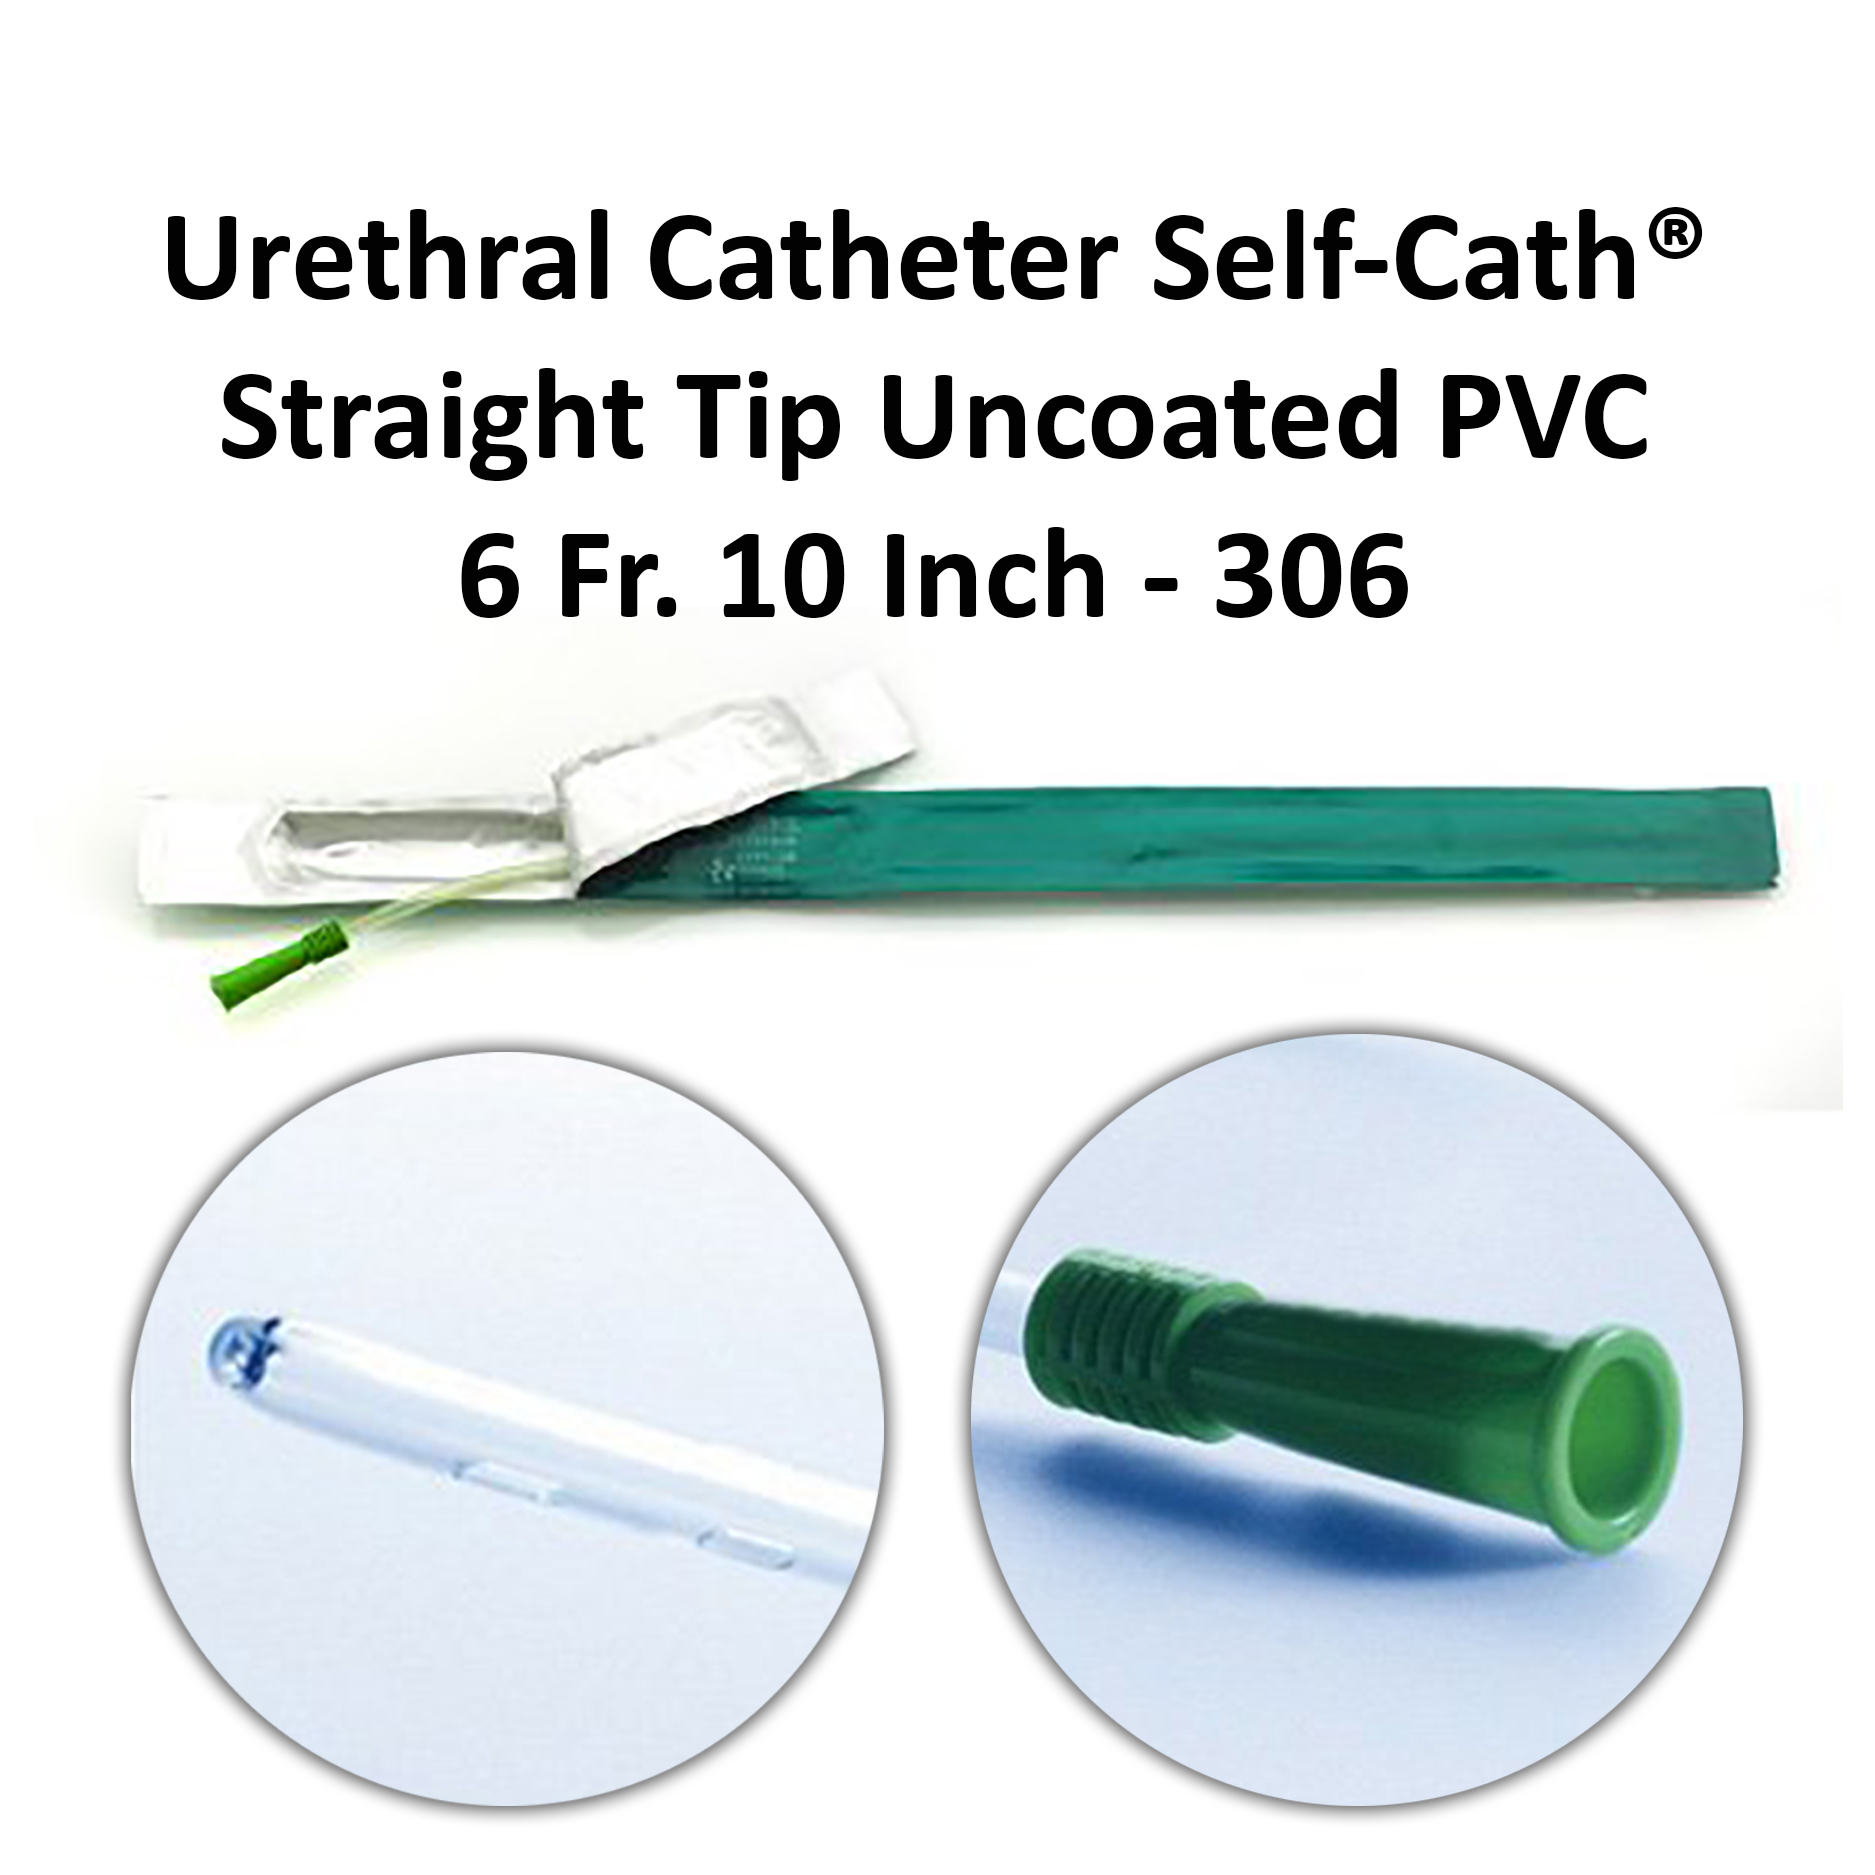 Urethral Catheter Self-Cath® Straight Tip Uncoated PVC 6 Fr. 10 Inch - 306